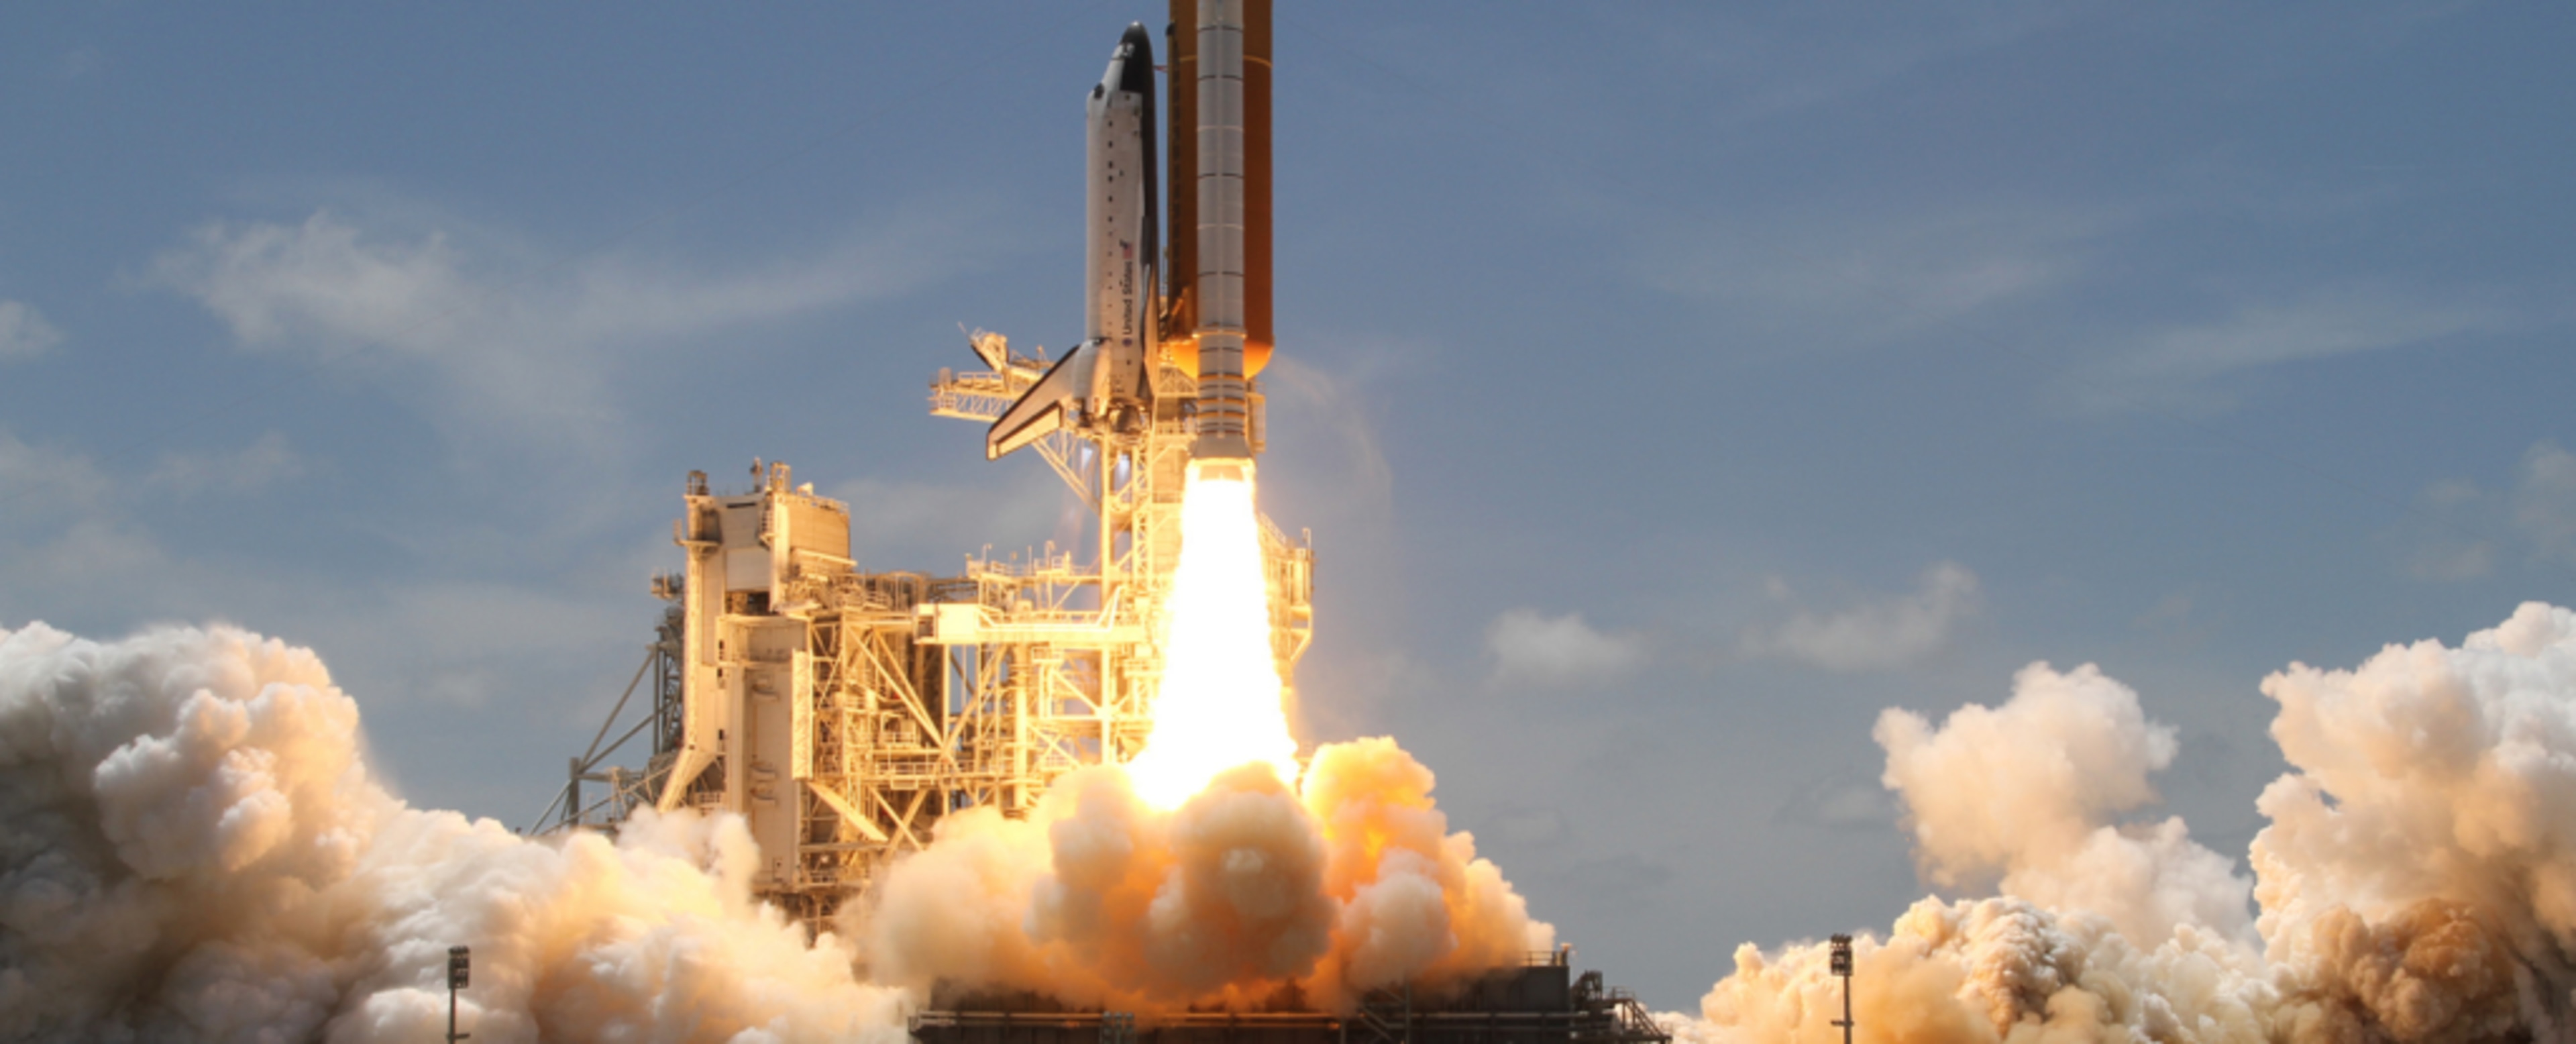 Development process as rapid as Space Shuttle taking off, illustrating Cuttlesoft's agile methodology